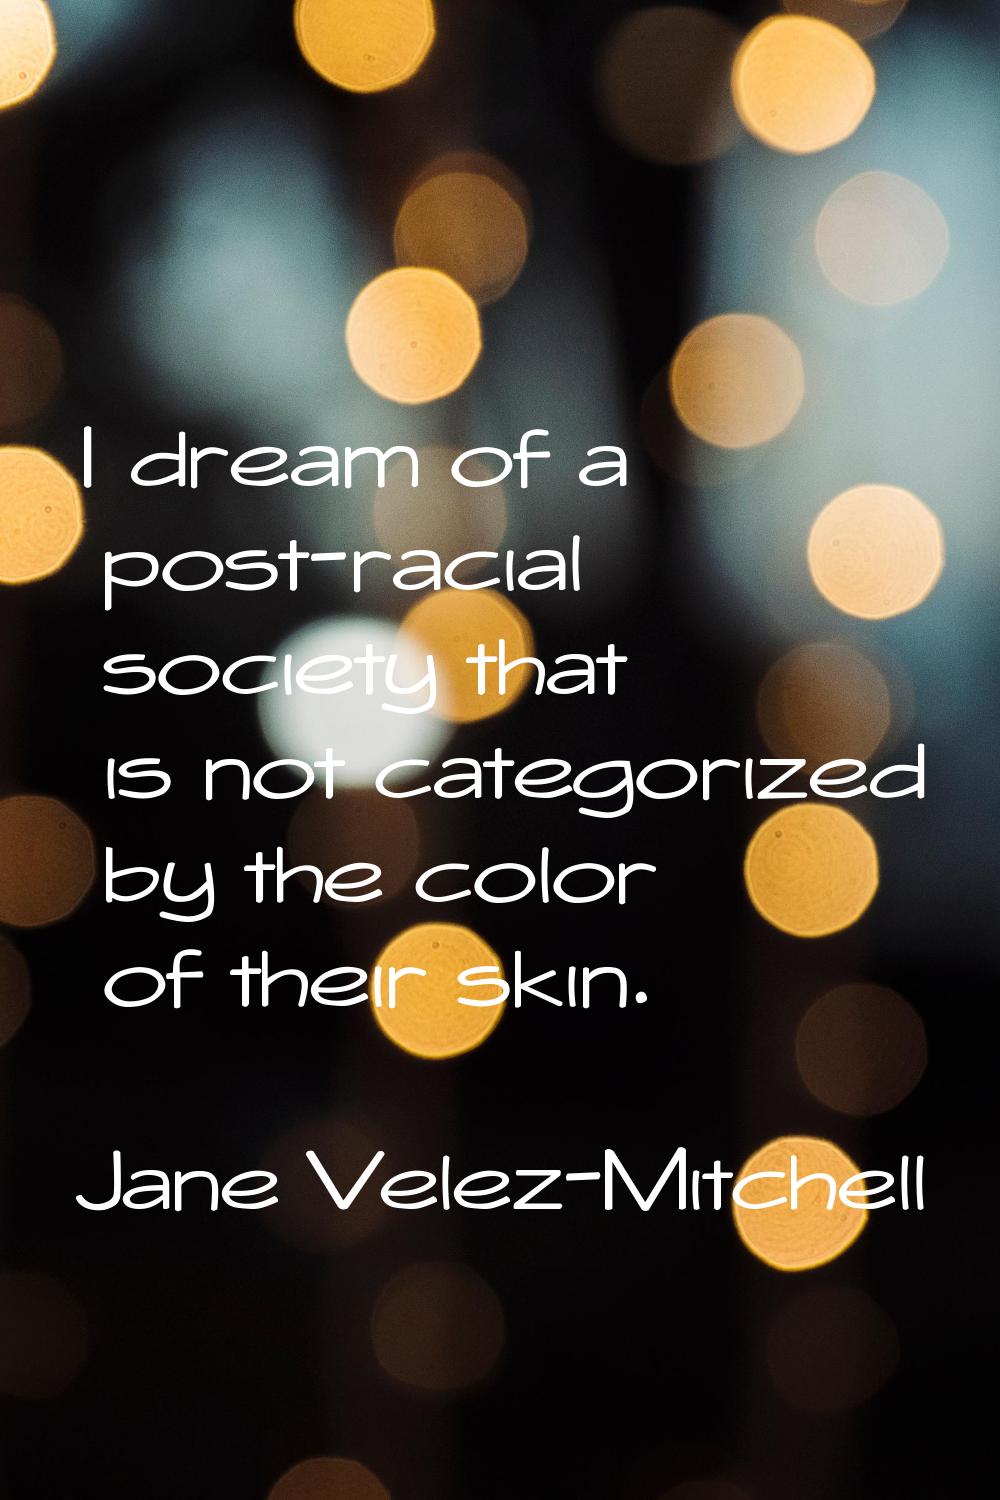 I dream of a post-racial society that is not categorized by the color of their skin.